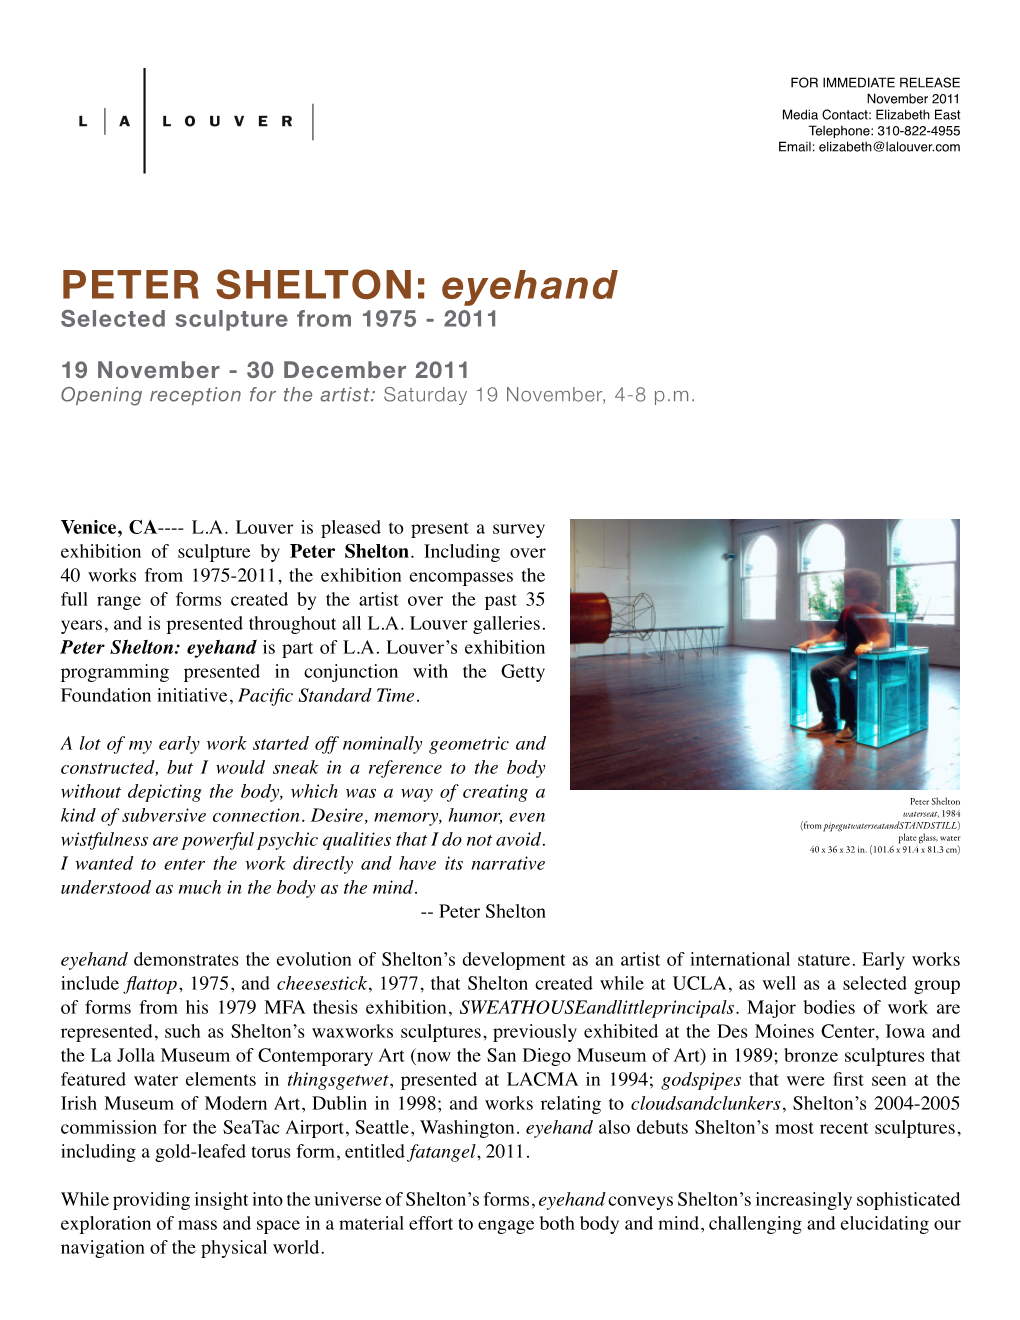 PETER SHELTON: Eyehand Selected Sculpture from 1975 - 2011